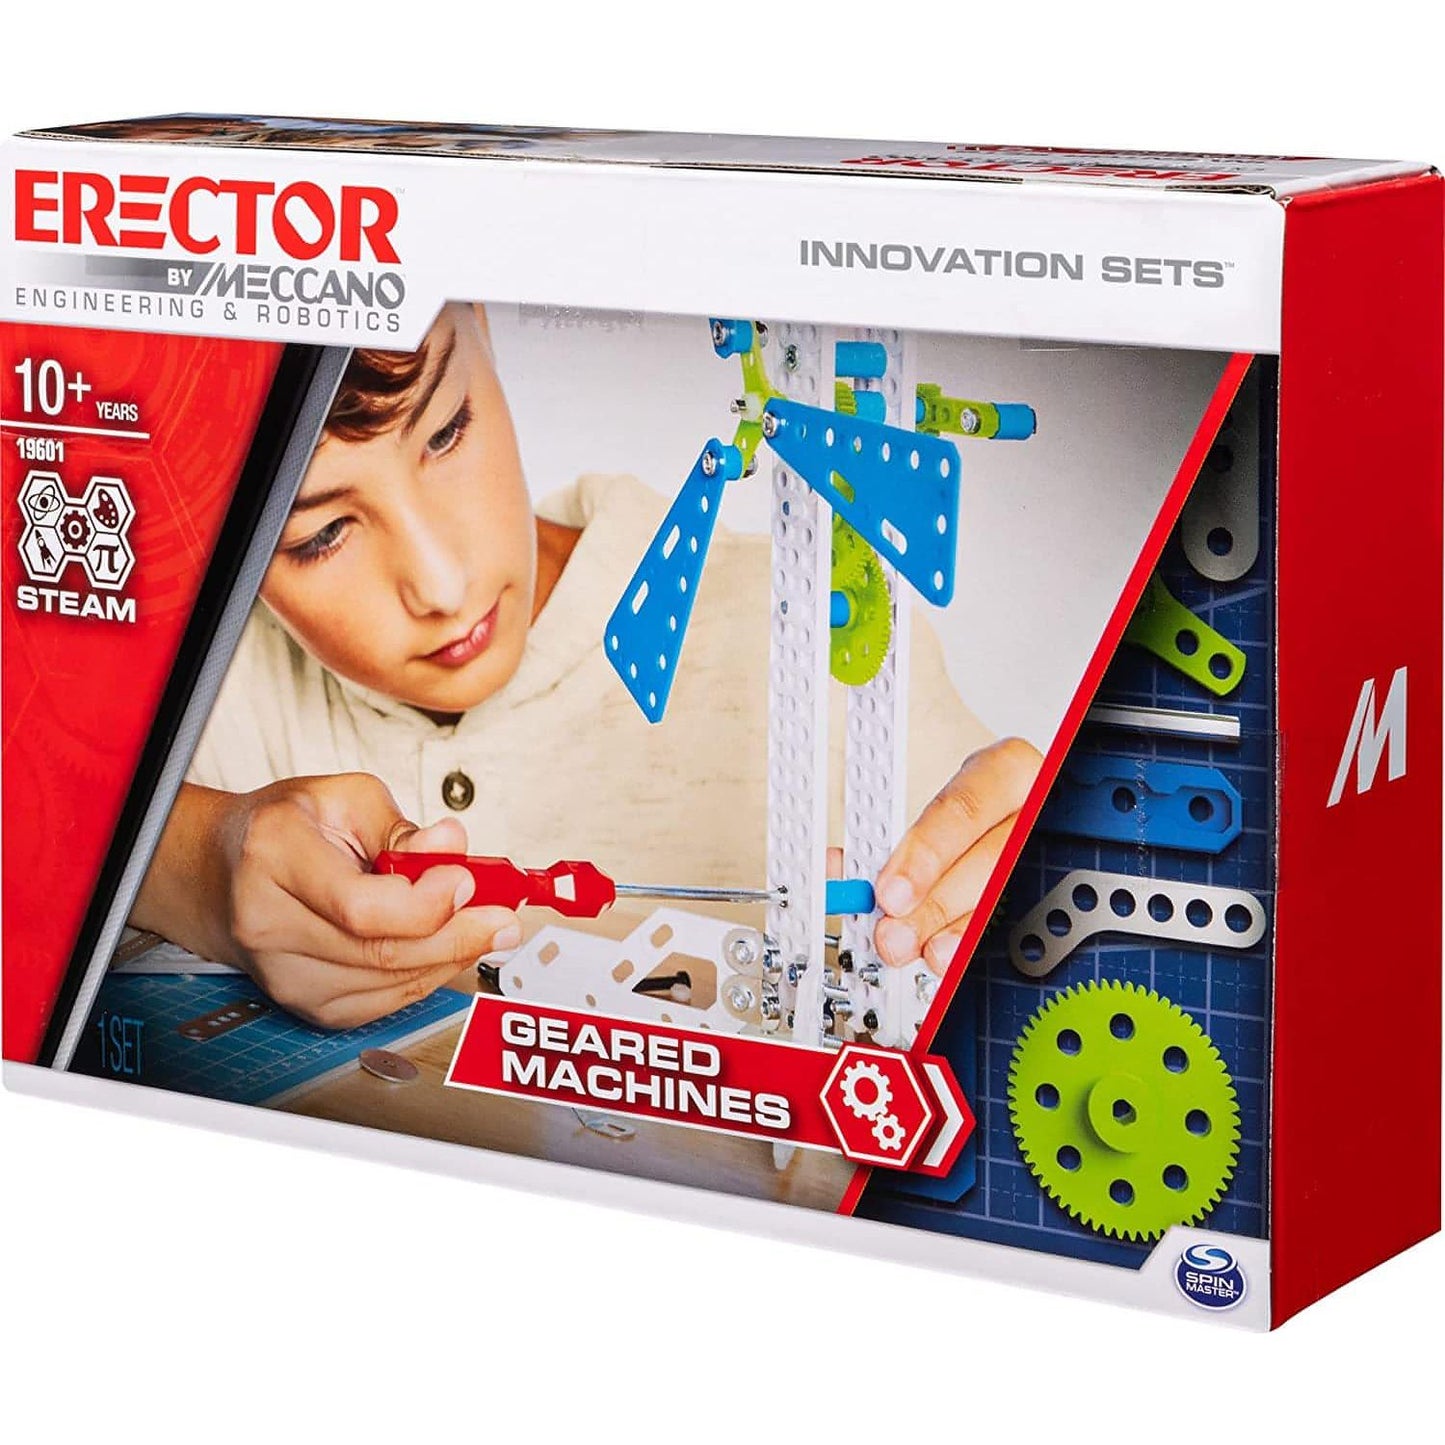 Meccano Erector by Geared Machines S.T.E.A.M. Building Kit with Moving Parts - Brandat Outlet